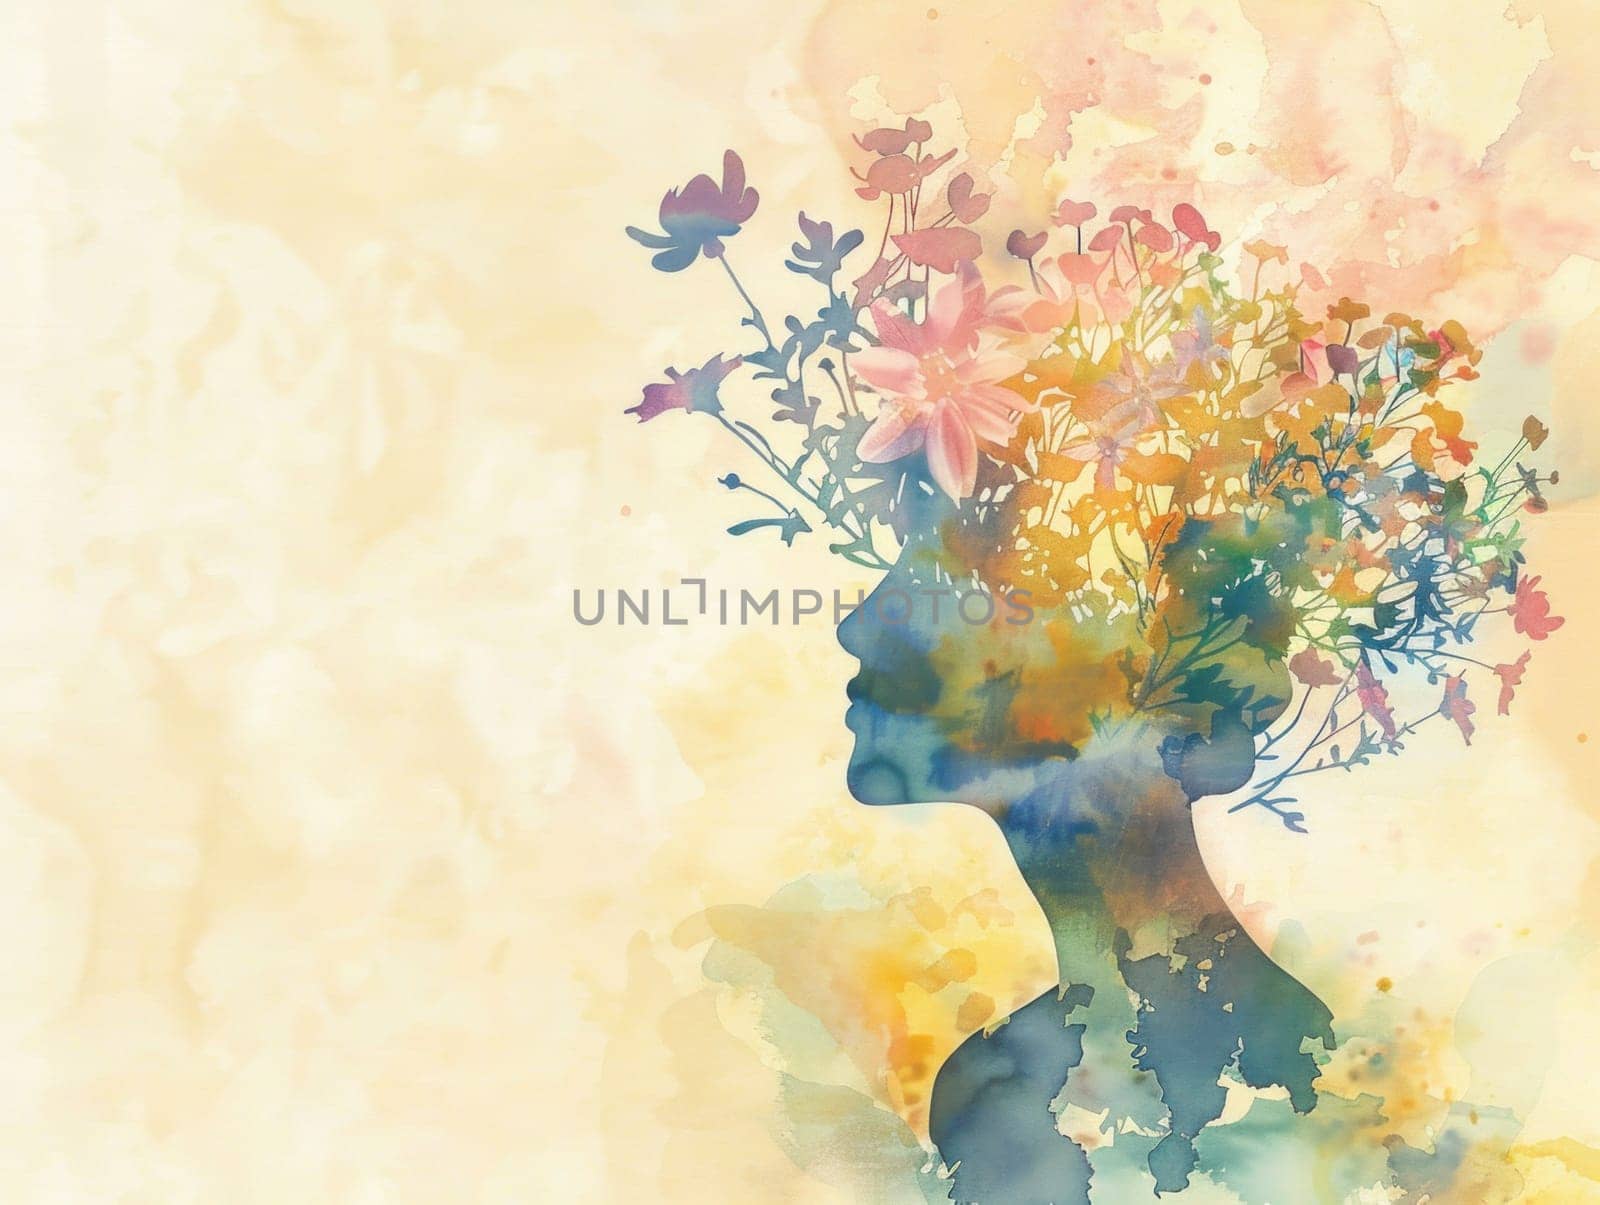 Abstract woman silhouette with flowers in hair on watercolor background, beauty and wellness concept for stock photos